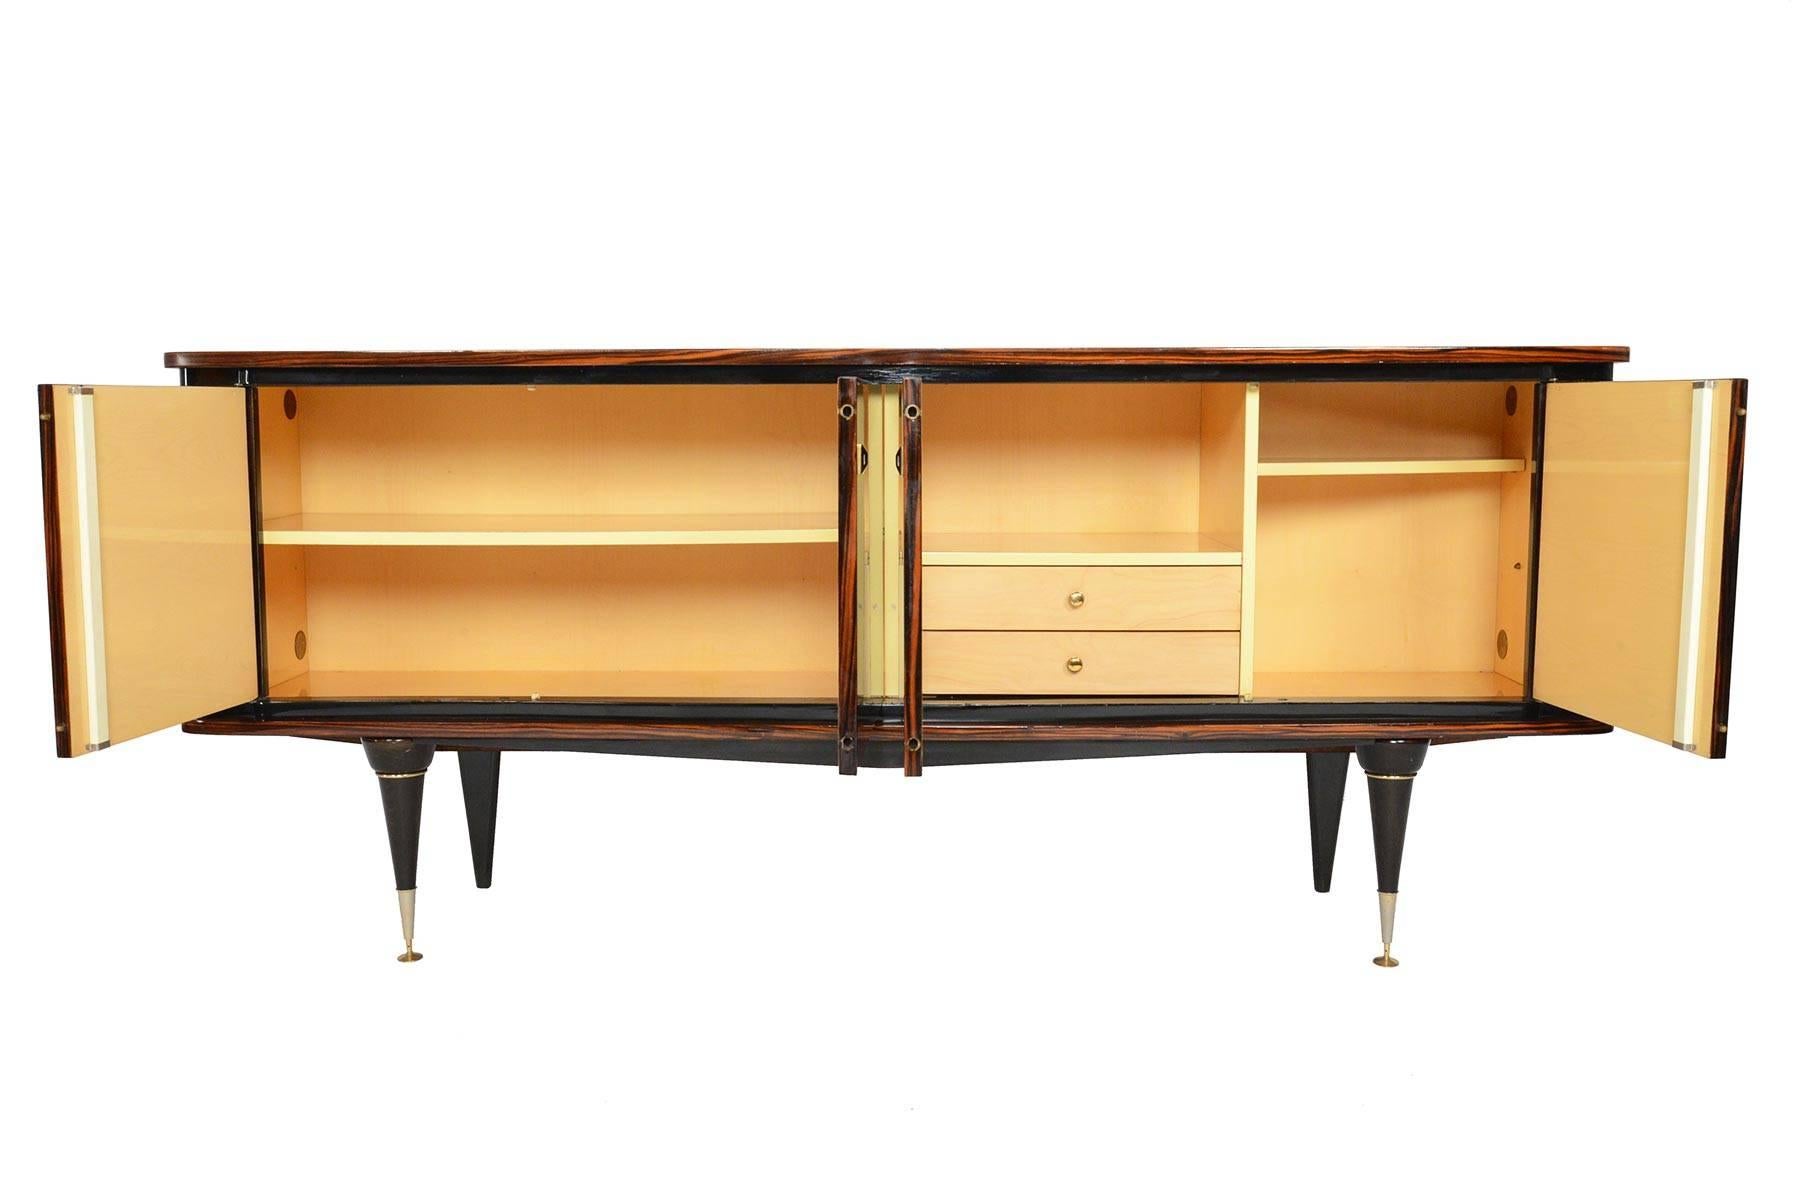 This French Art Deco credenza is cased in exotic Macassar and features rounded corners and ornate ebony legs. Beautiful book match veneer accentuates its soft shape. Two pairs of locked doors open to reveal three bays. The spacious left bay offers